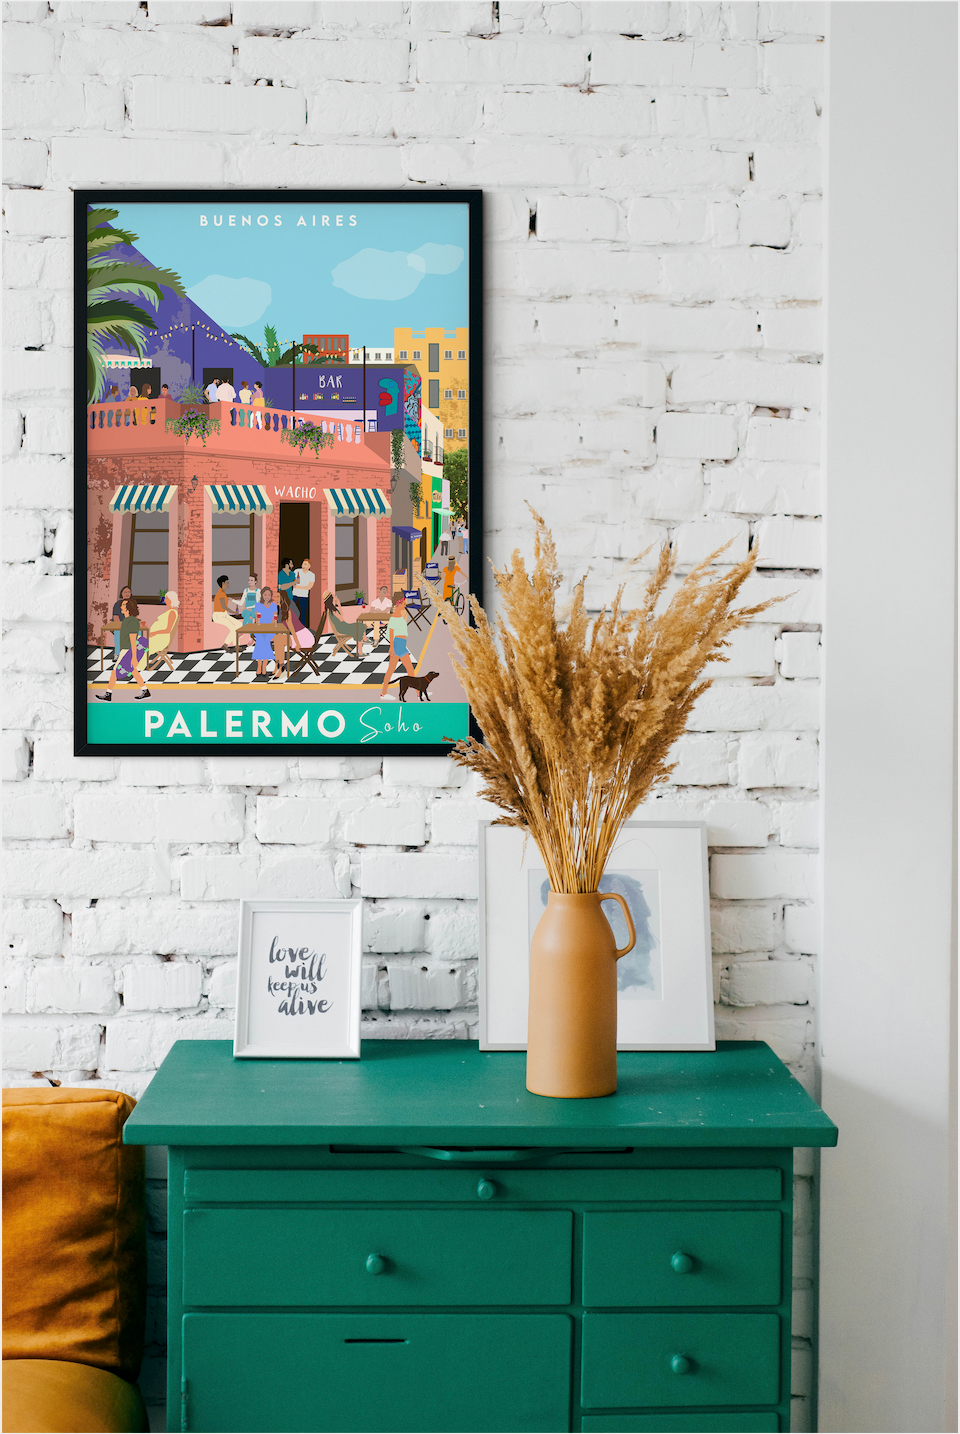 Travel poster of Buenos Aires Palermo Soho